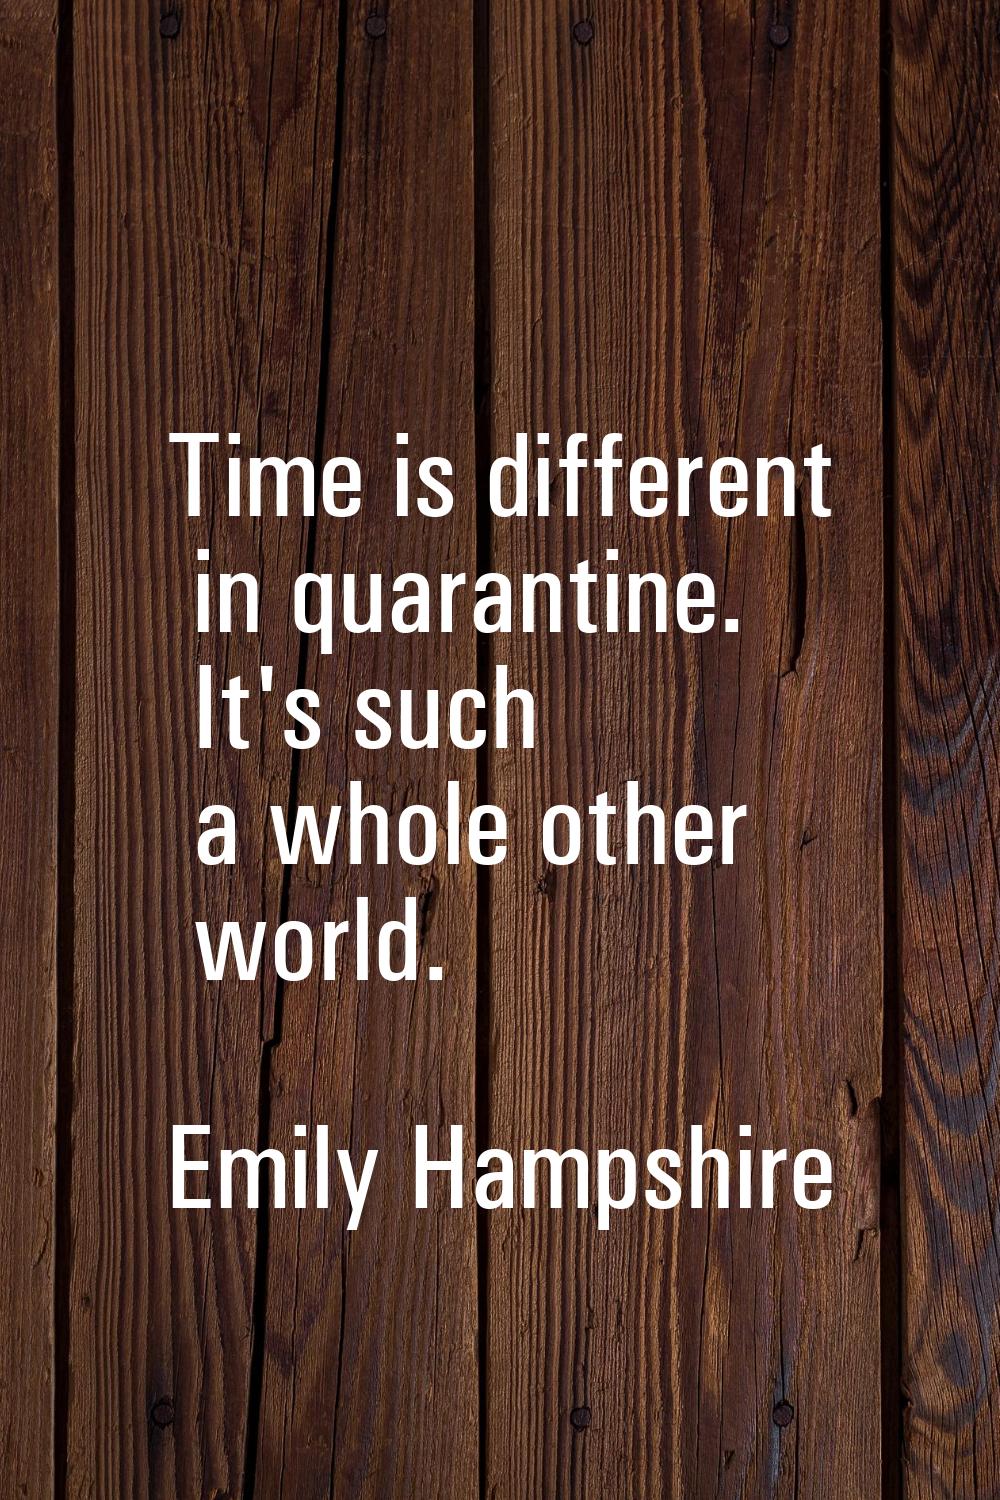 Time is different in quarantine. It's such a whole other world.